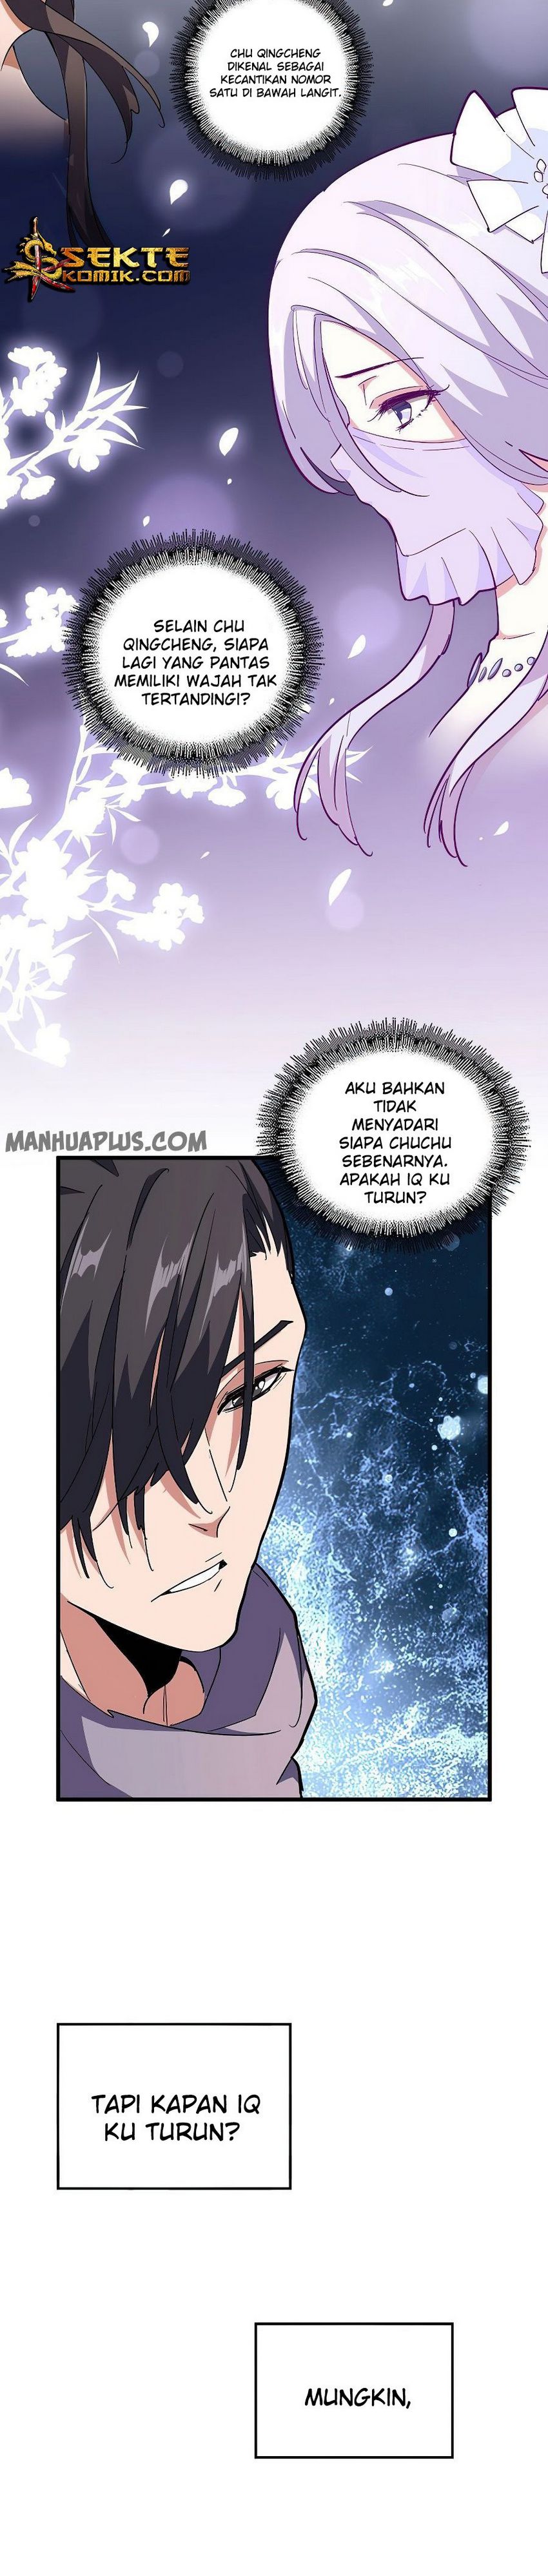 Magic Emperor Chapter 135 Image 2